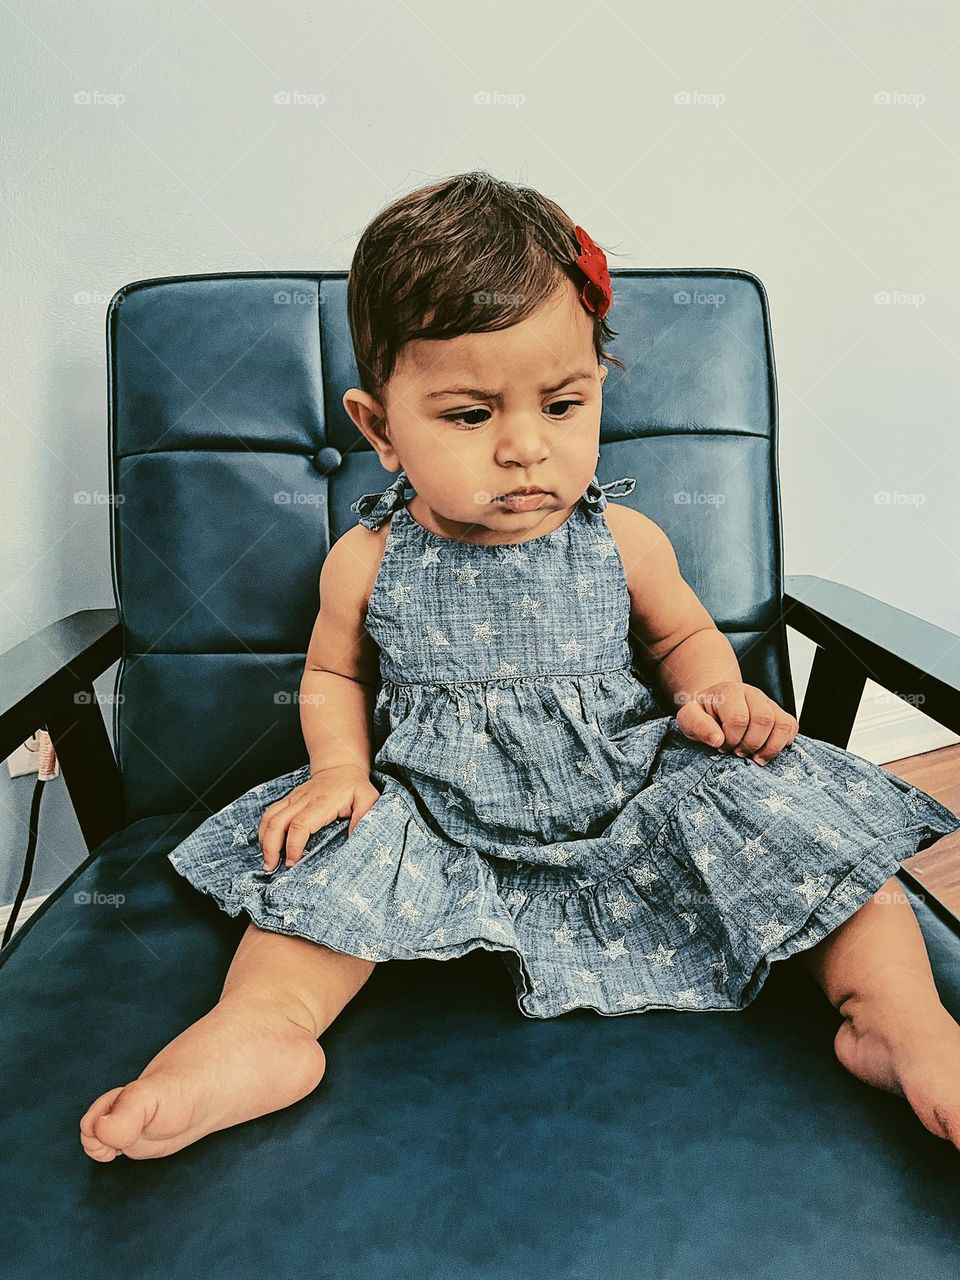 Child is angry sitting in chair, baby girl with angry expression on her face, little girl expressing anger, angry expressions on infants, little girl looks mad, sitting in a chair and being angry, infants expressing emotions 